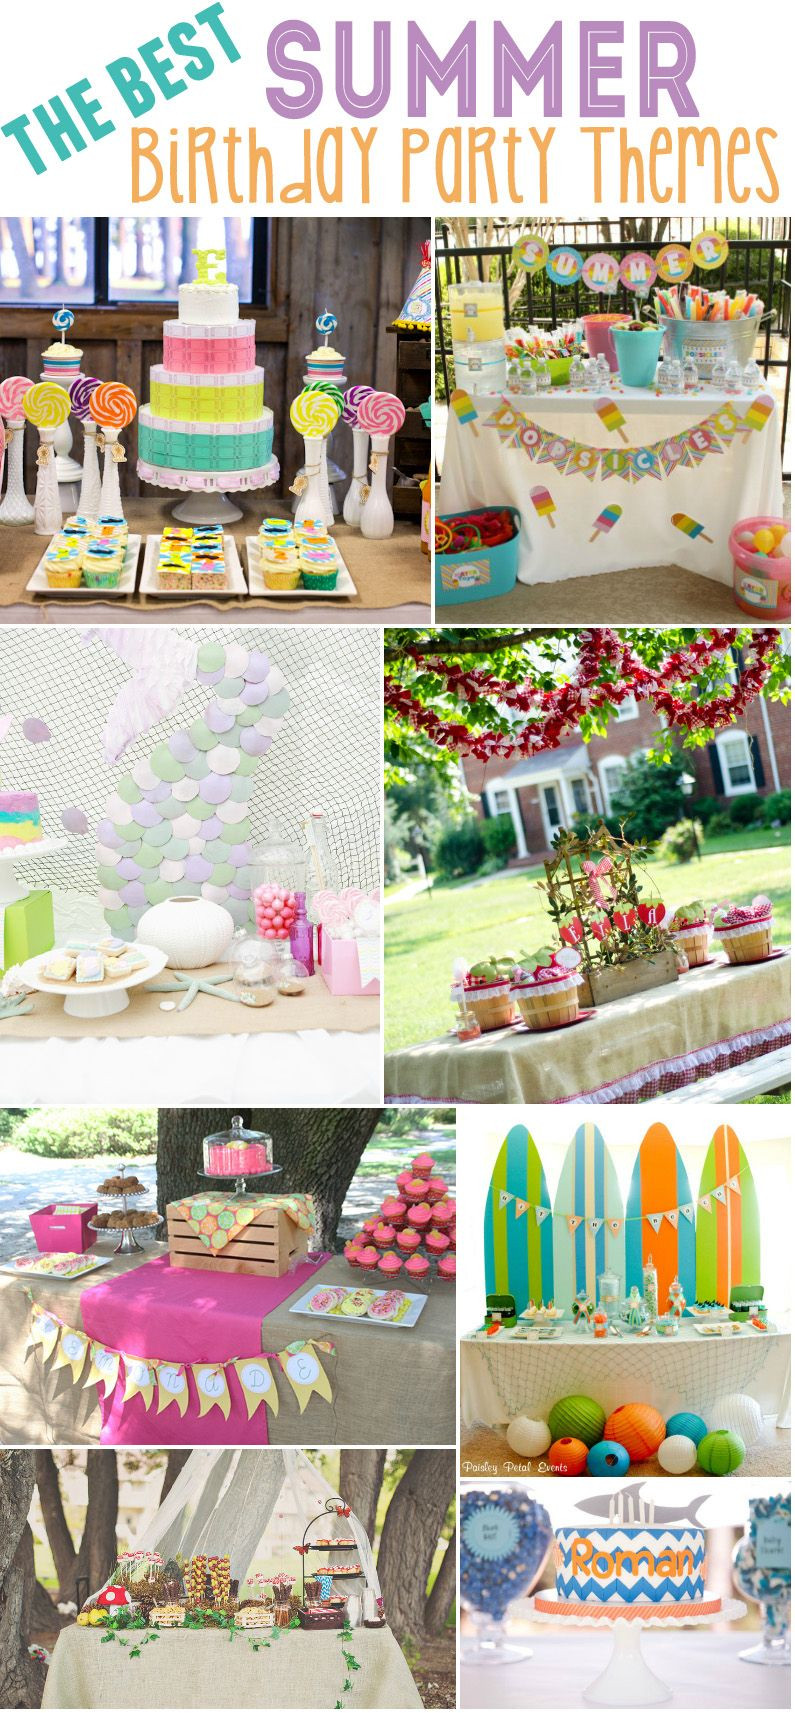 Cool Summer Party Ideas
 15 Best Summer Birthday Party Themes Design Dazzle